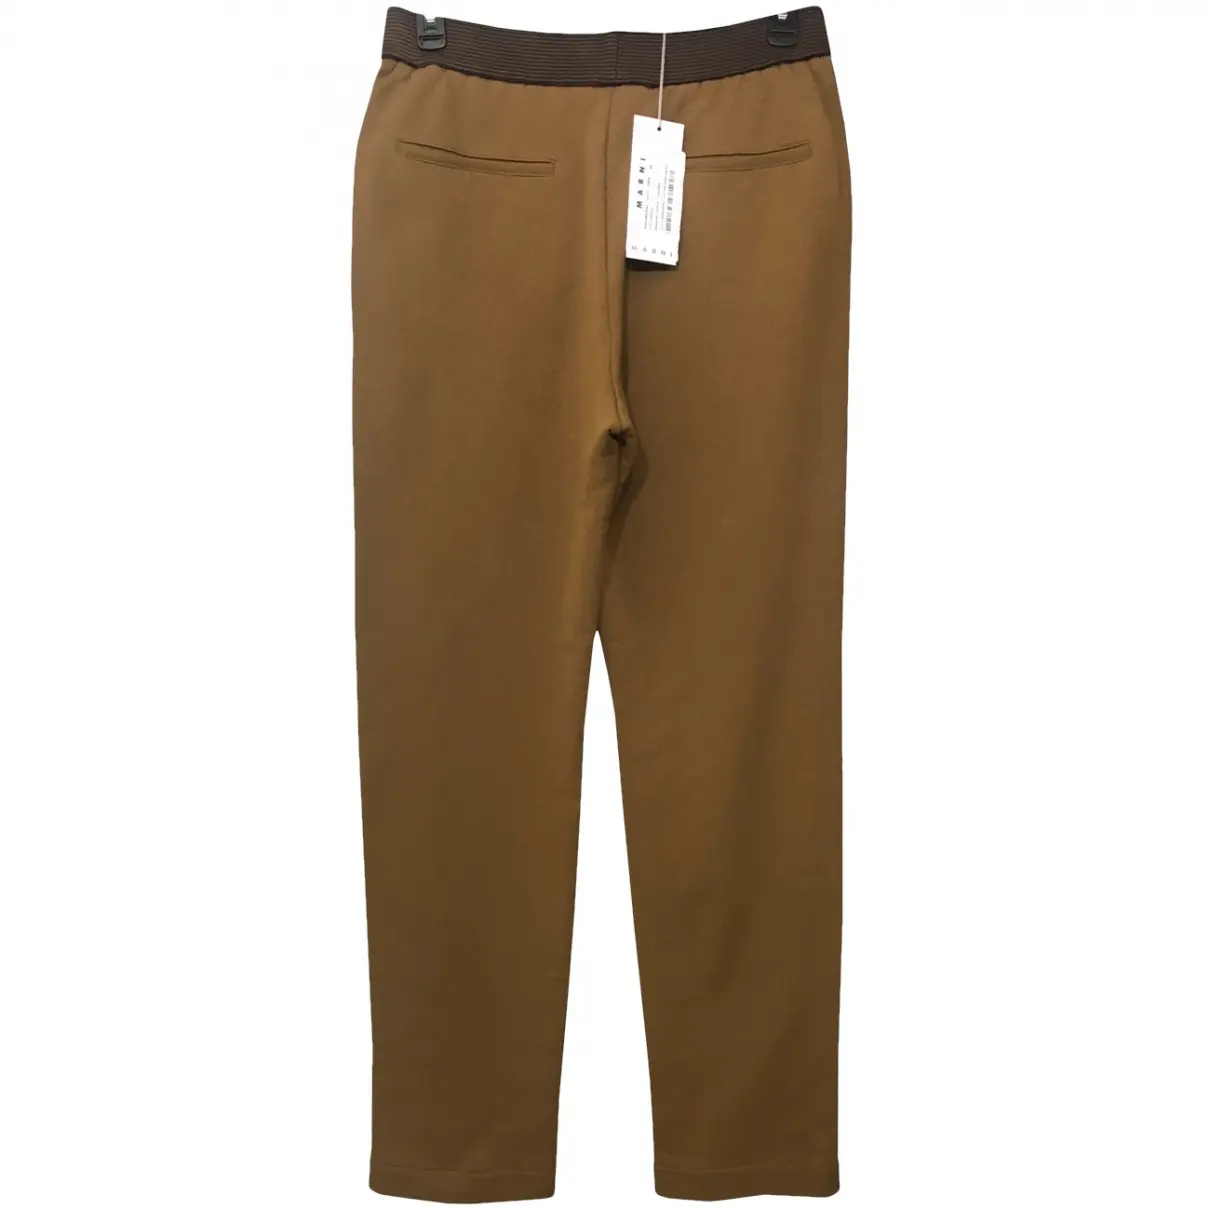 Buy Marni Trousers online